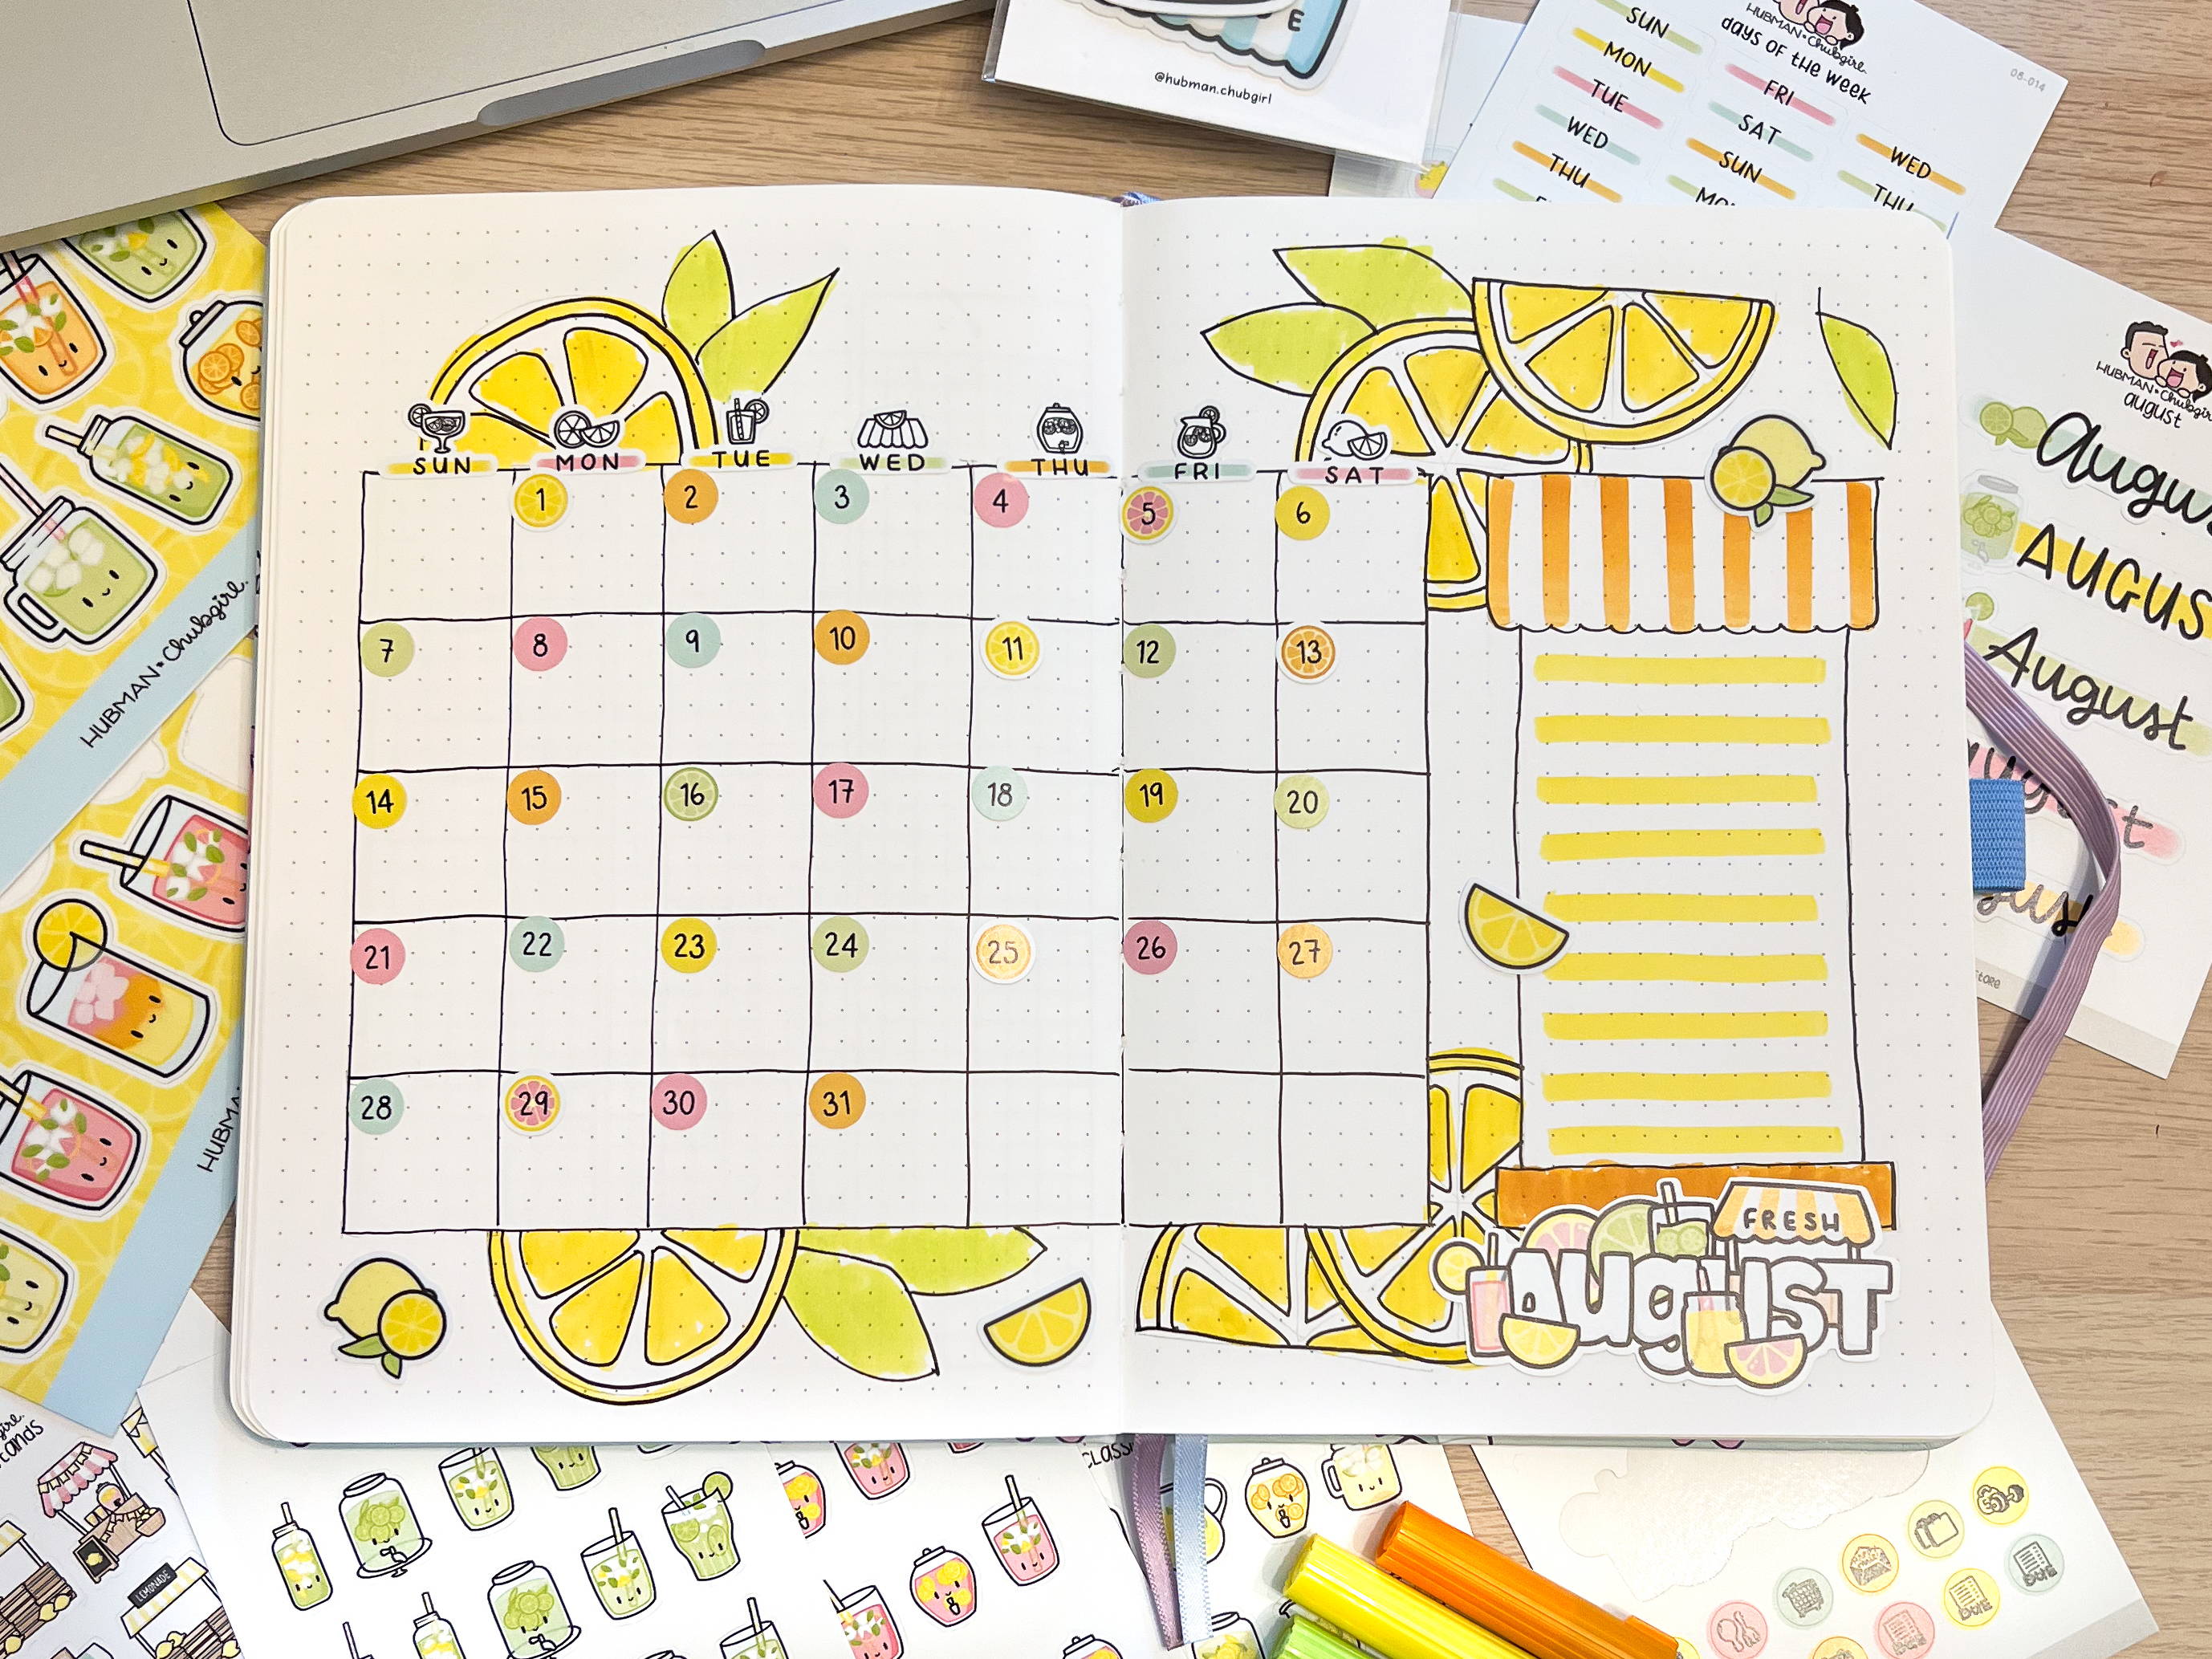 MAY Bujo Monthly Sticker Kit